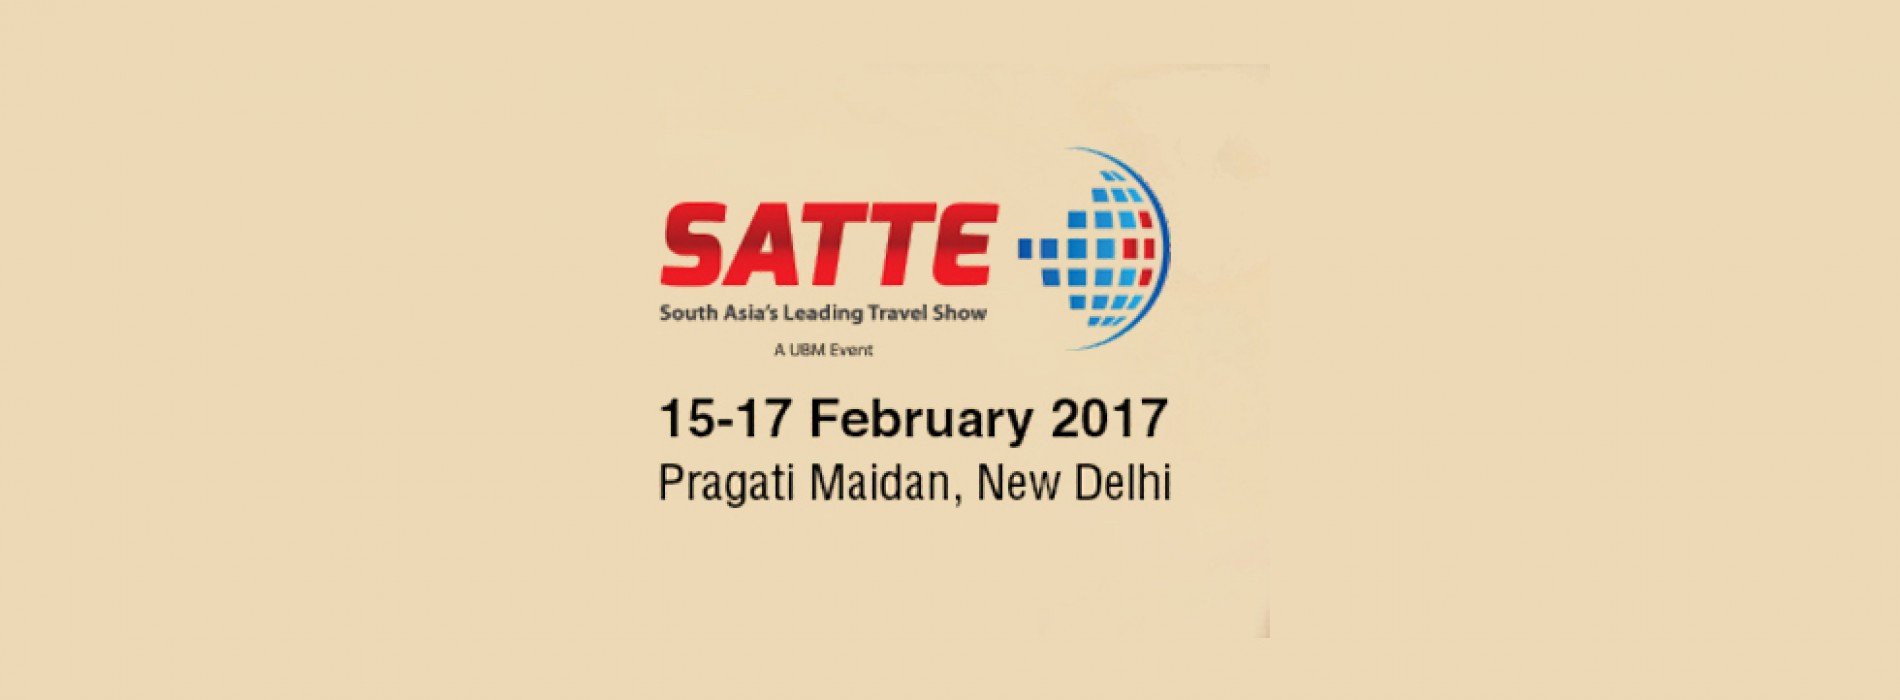 STB’s “Hands in Partnership” Journey through 3 cities and YourSingapore pavilion at SATTE 2017